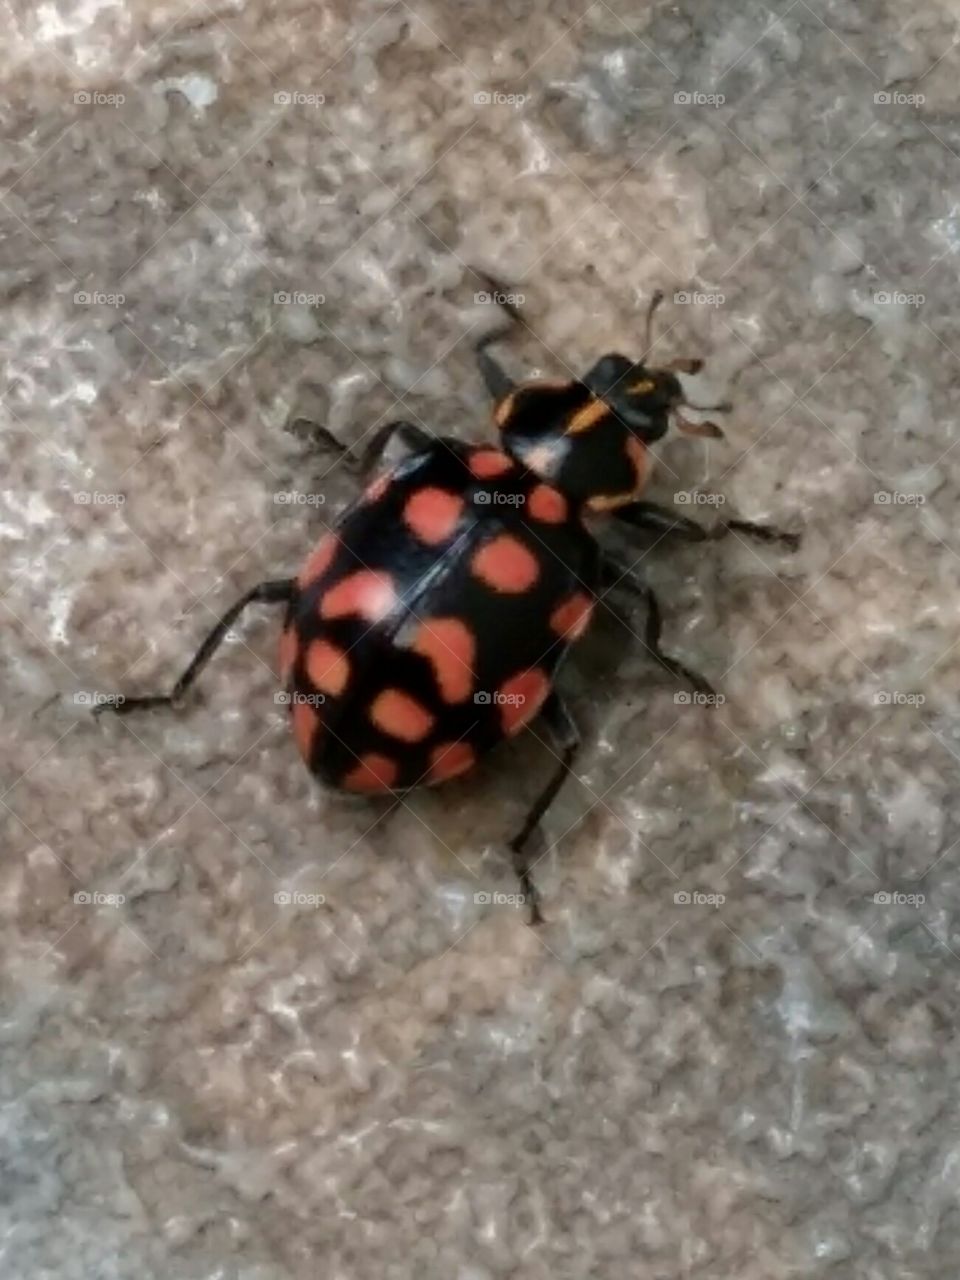 A bug or a ladybird ?
A insect red with black stain or black with red stain ?